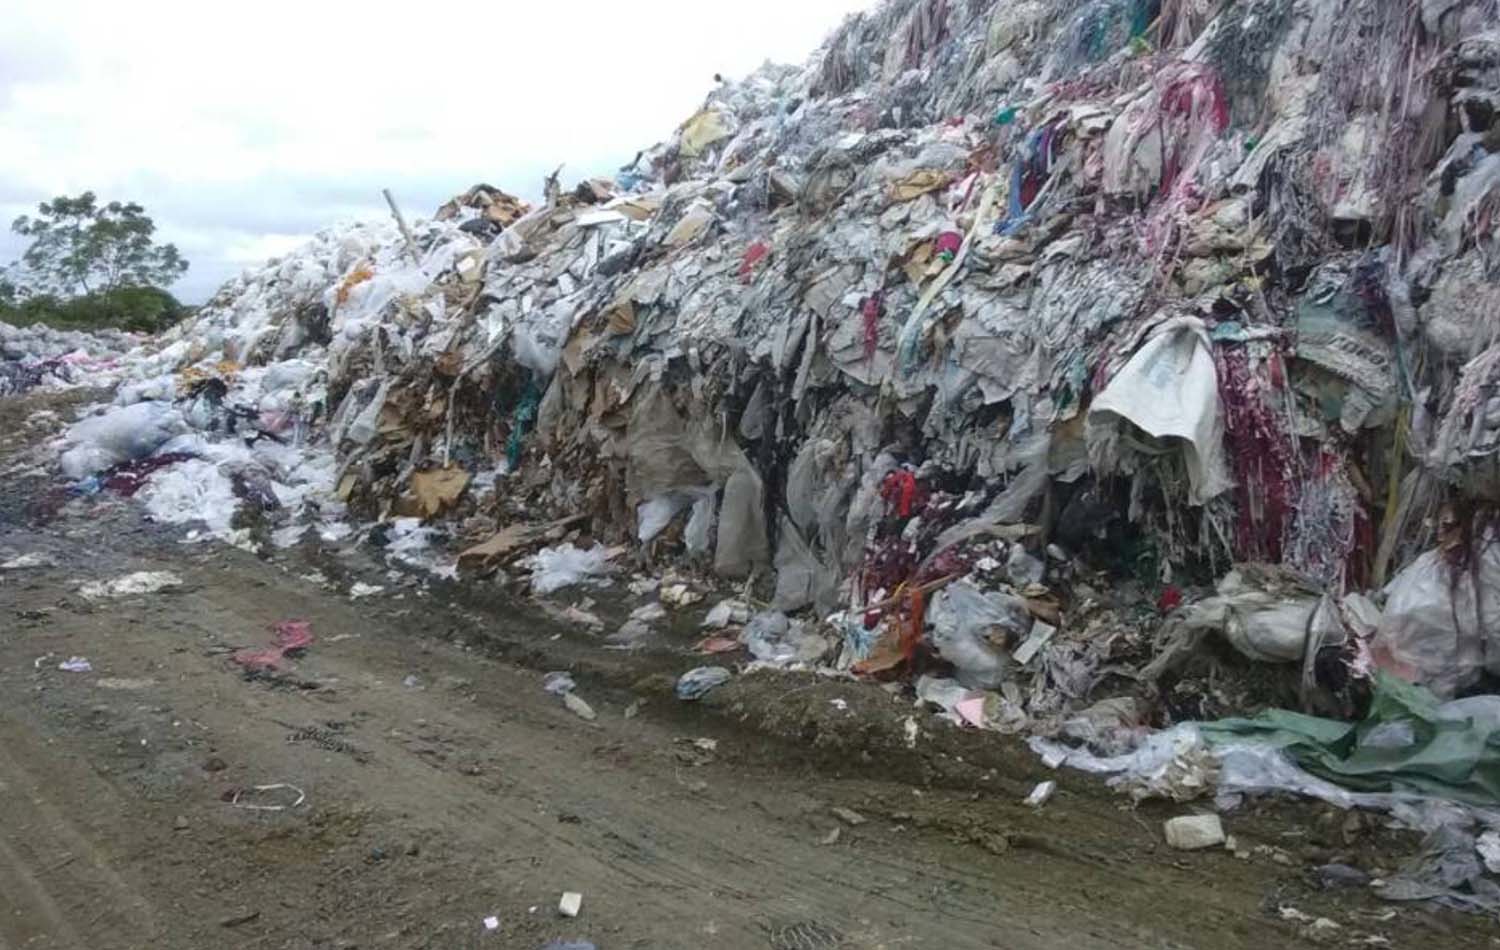 Piles of trash from the Park before the fire in 2020.